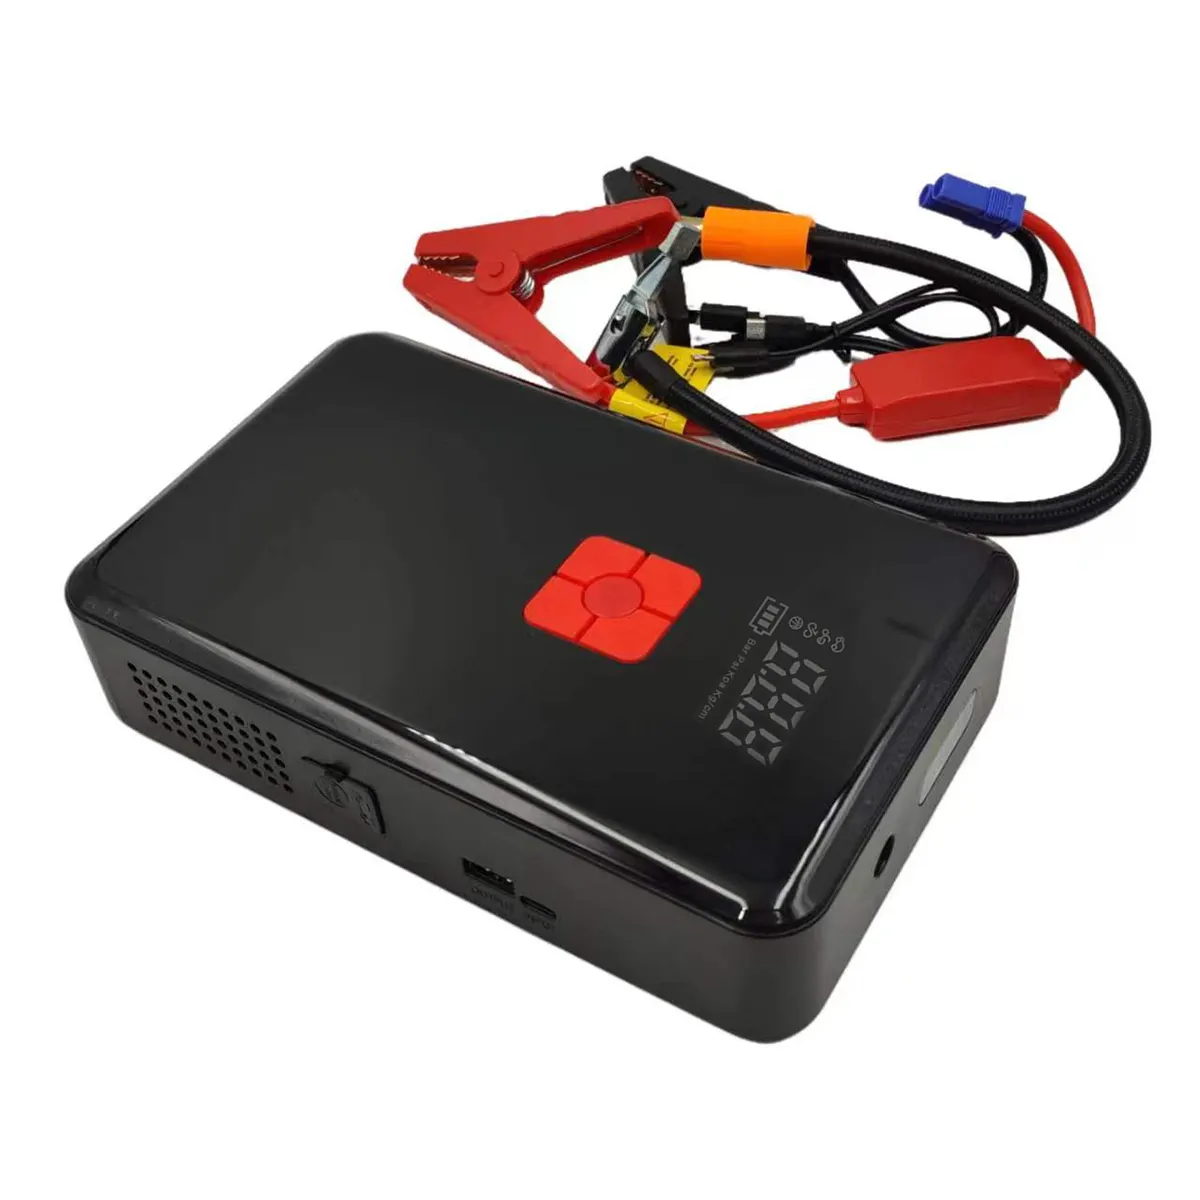 12V car boost battery jump start emergency power bank with air compression pump 300A car jump starter inflatable power starter